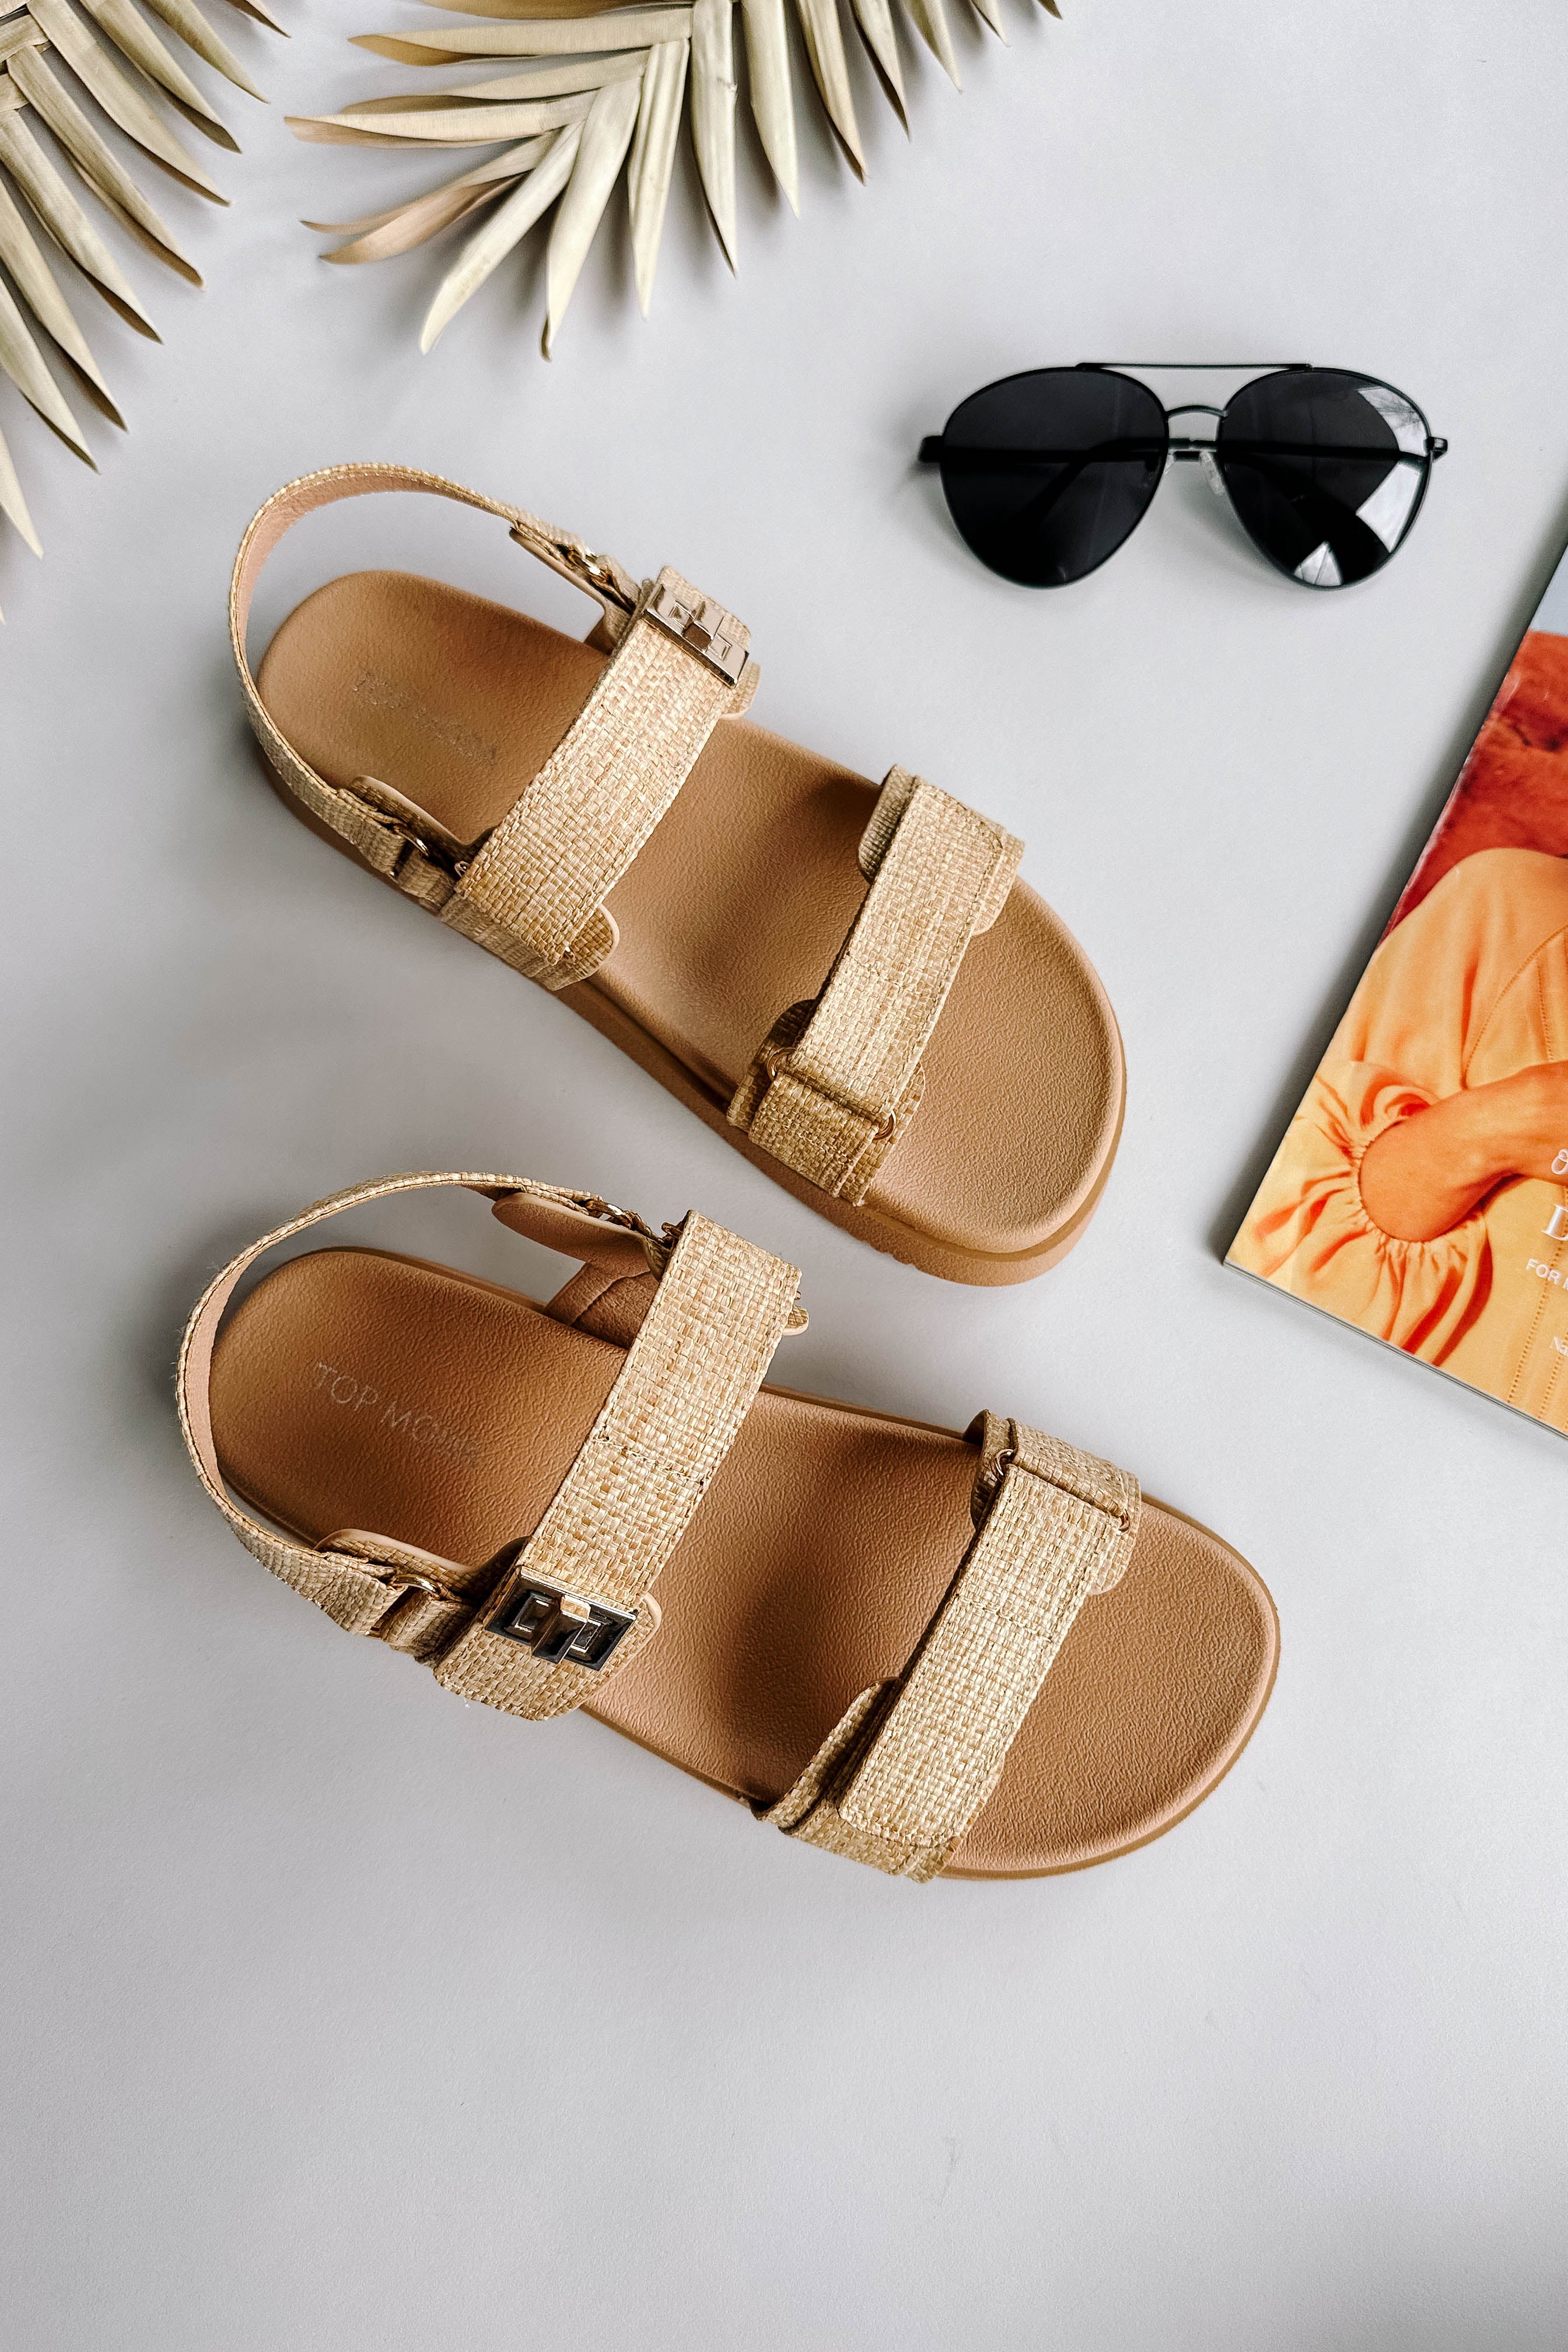 Ariel view of the Lyon Sandal in Beige Raffia which features natural raffia fabric, two adjustable velcro straps, adjustable back strap and round toe.